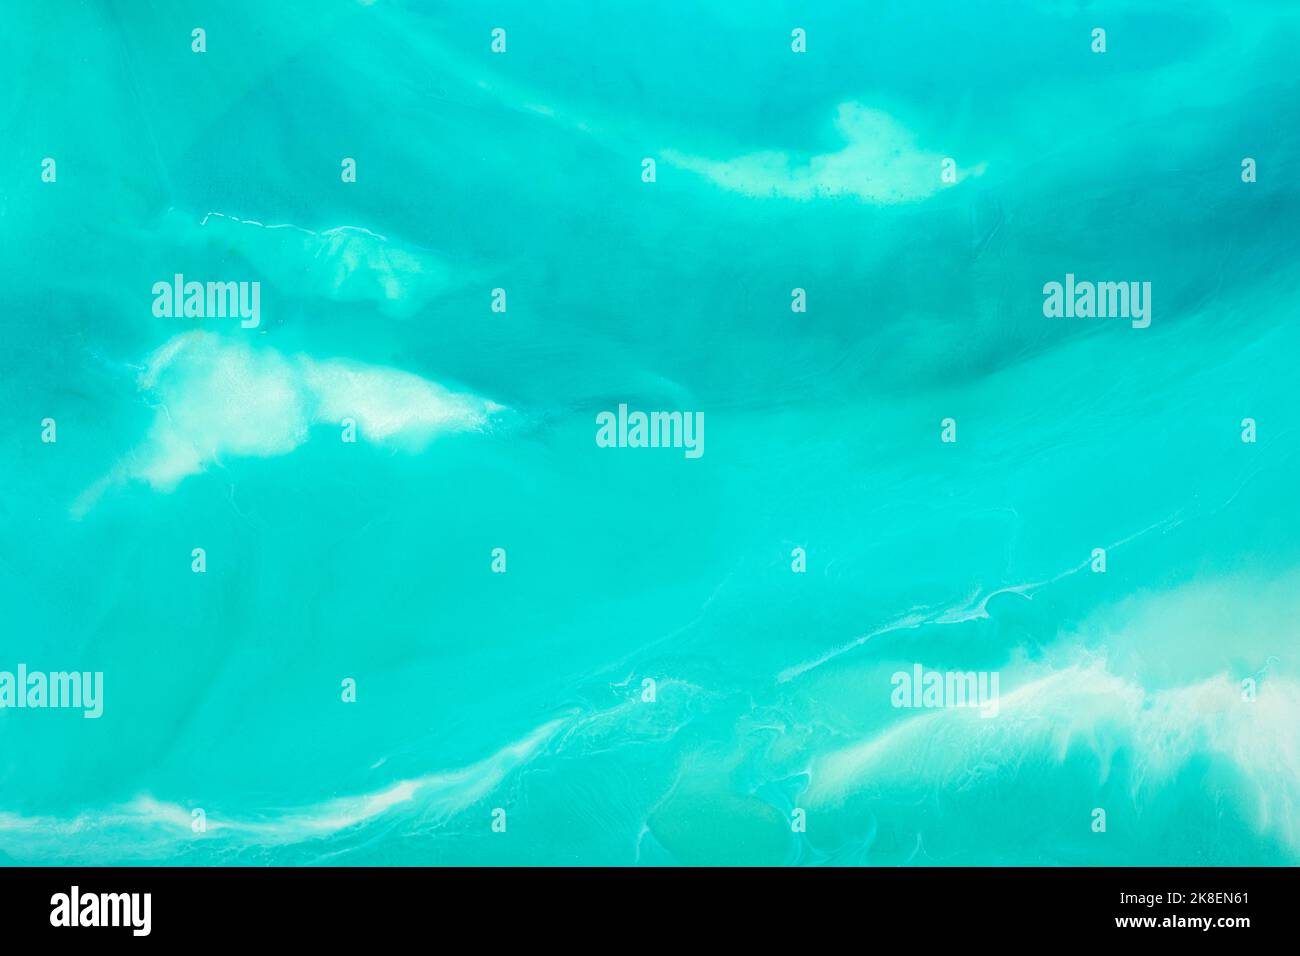 Painting background in a gentle blue color. Liquid, fluid art pattern. Original simulation of depth ocean and the sea surface. Modern design. Drawing Stock Photo